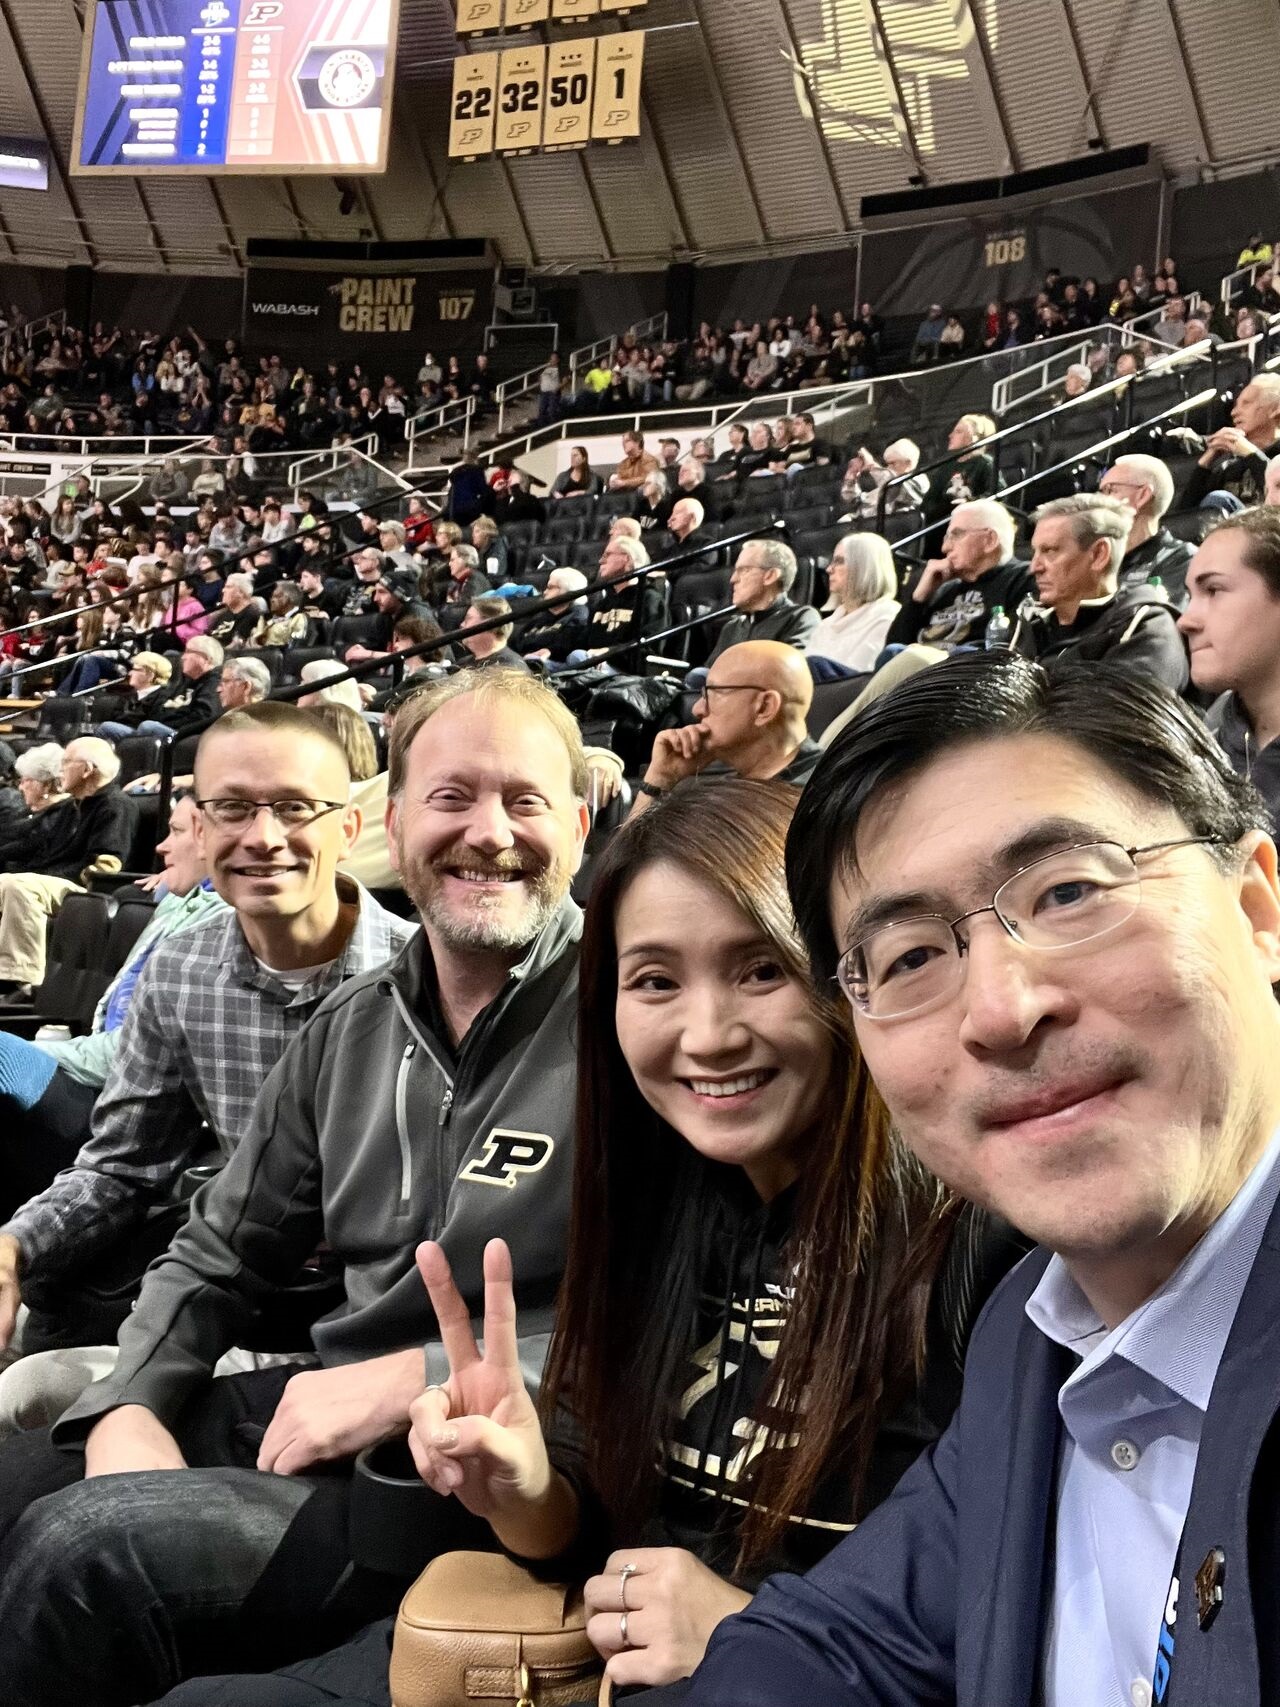 Faculty and Staff Appreciation Day at the Purdue University Women’s Basketball game! We thank all our amazing teammates for a great year of 2023! 💛🖤